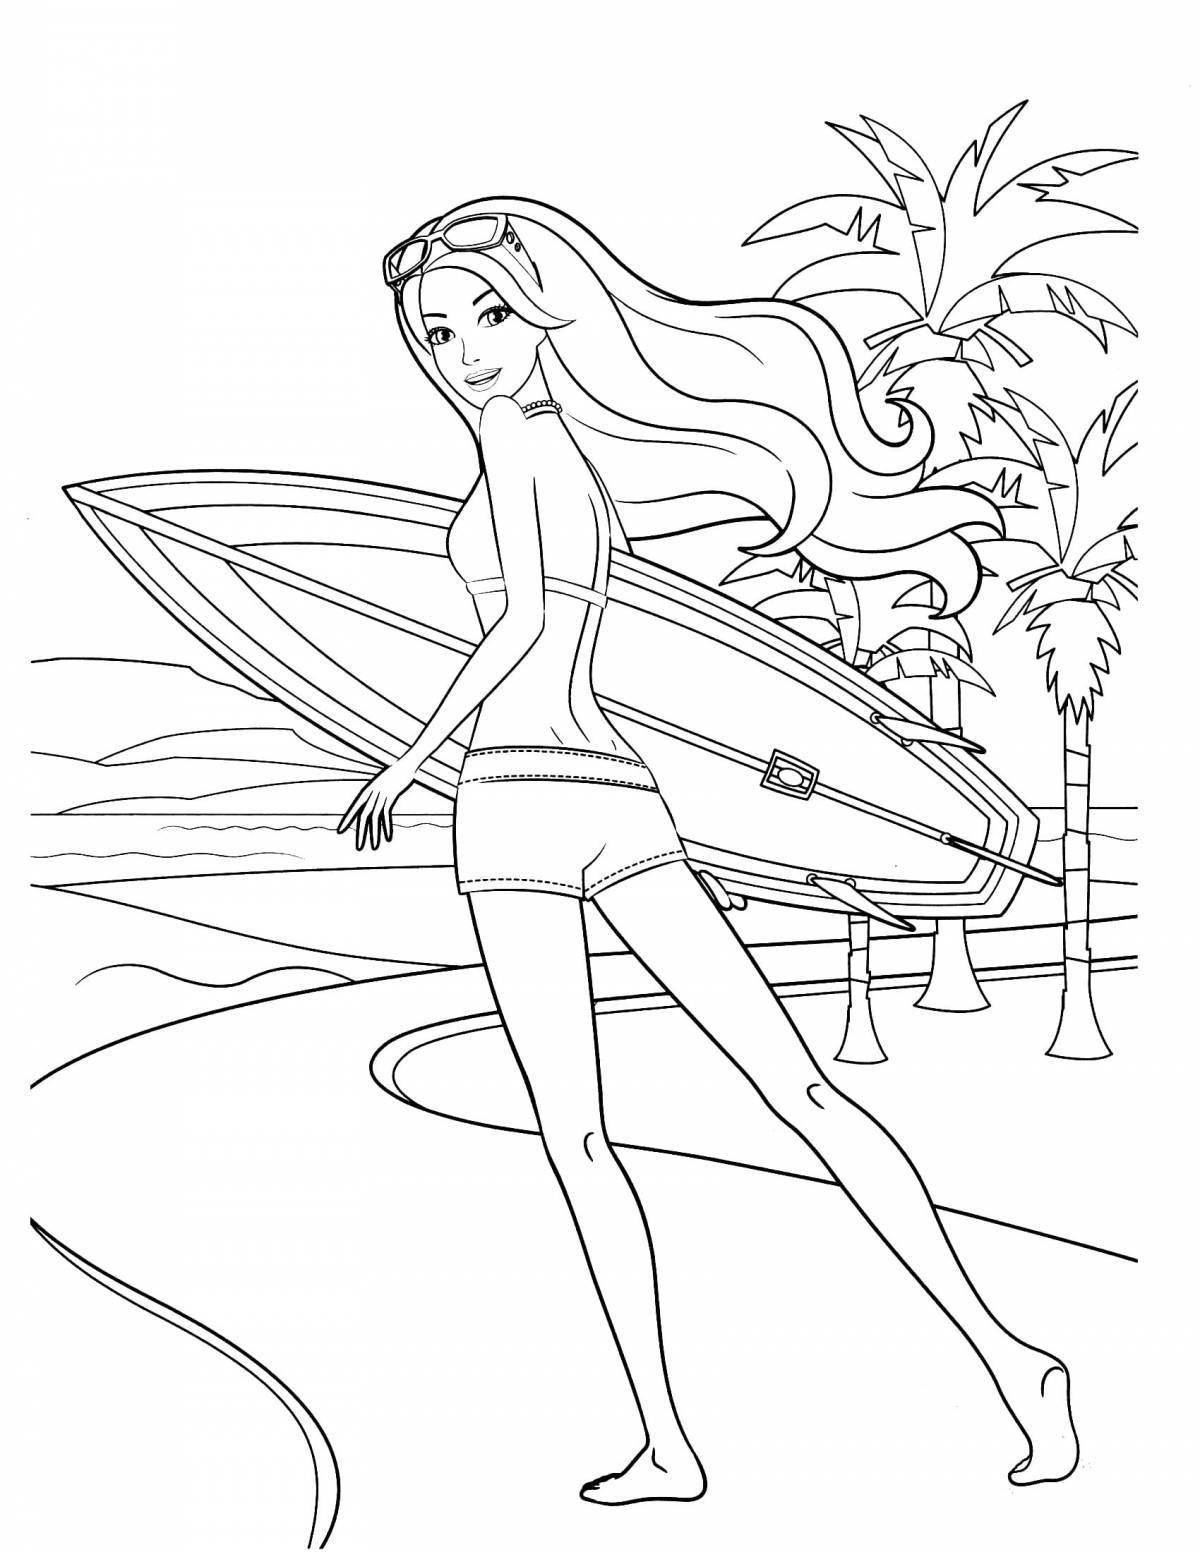 Funny barbie coloring book